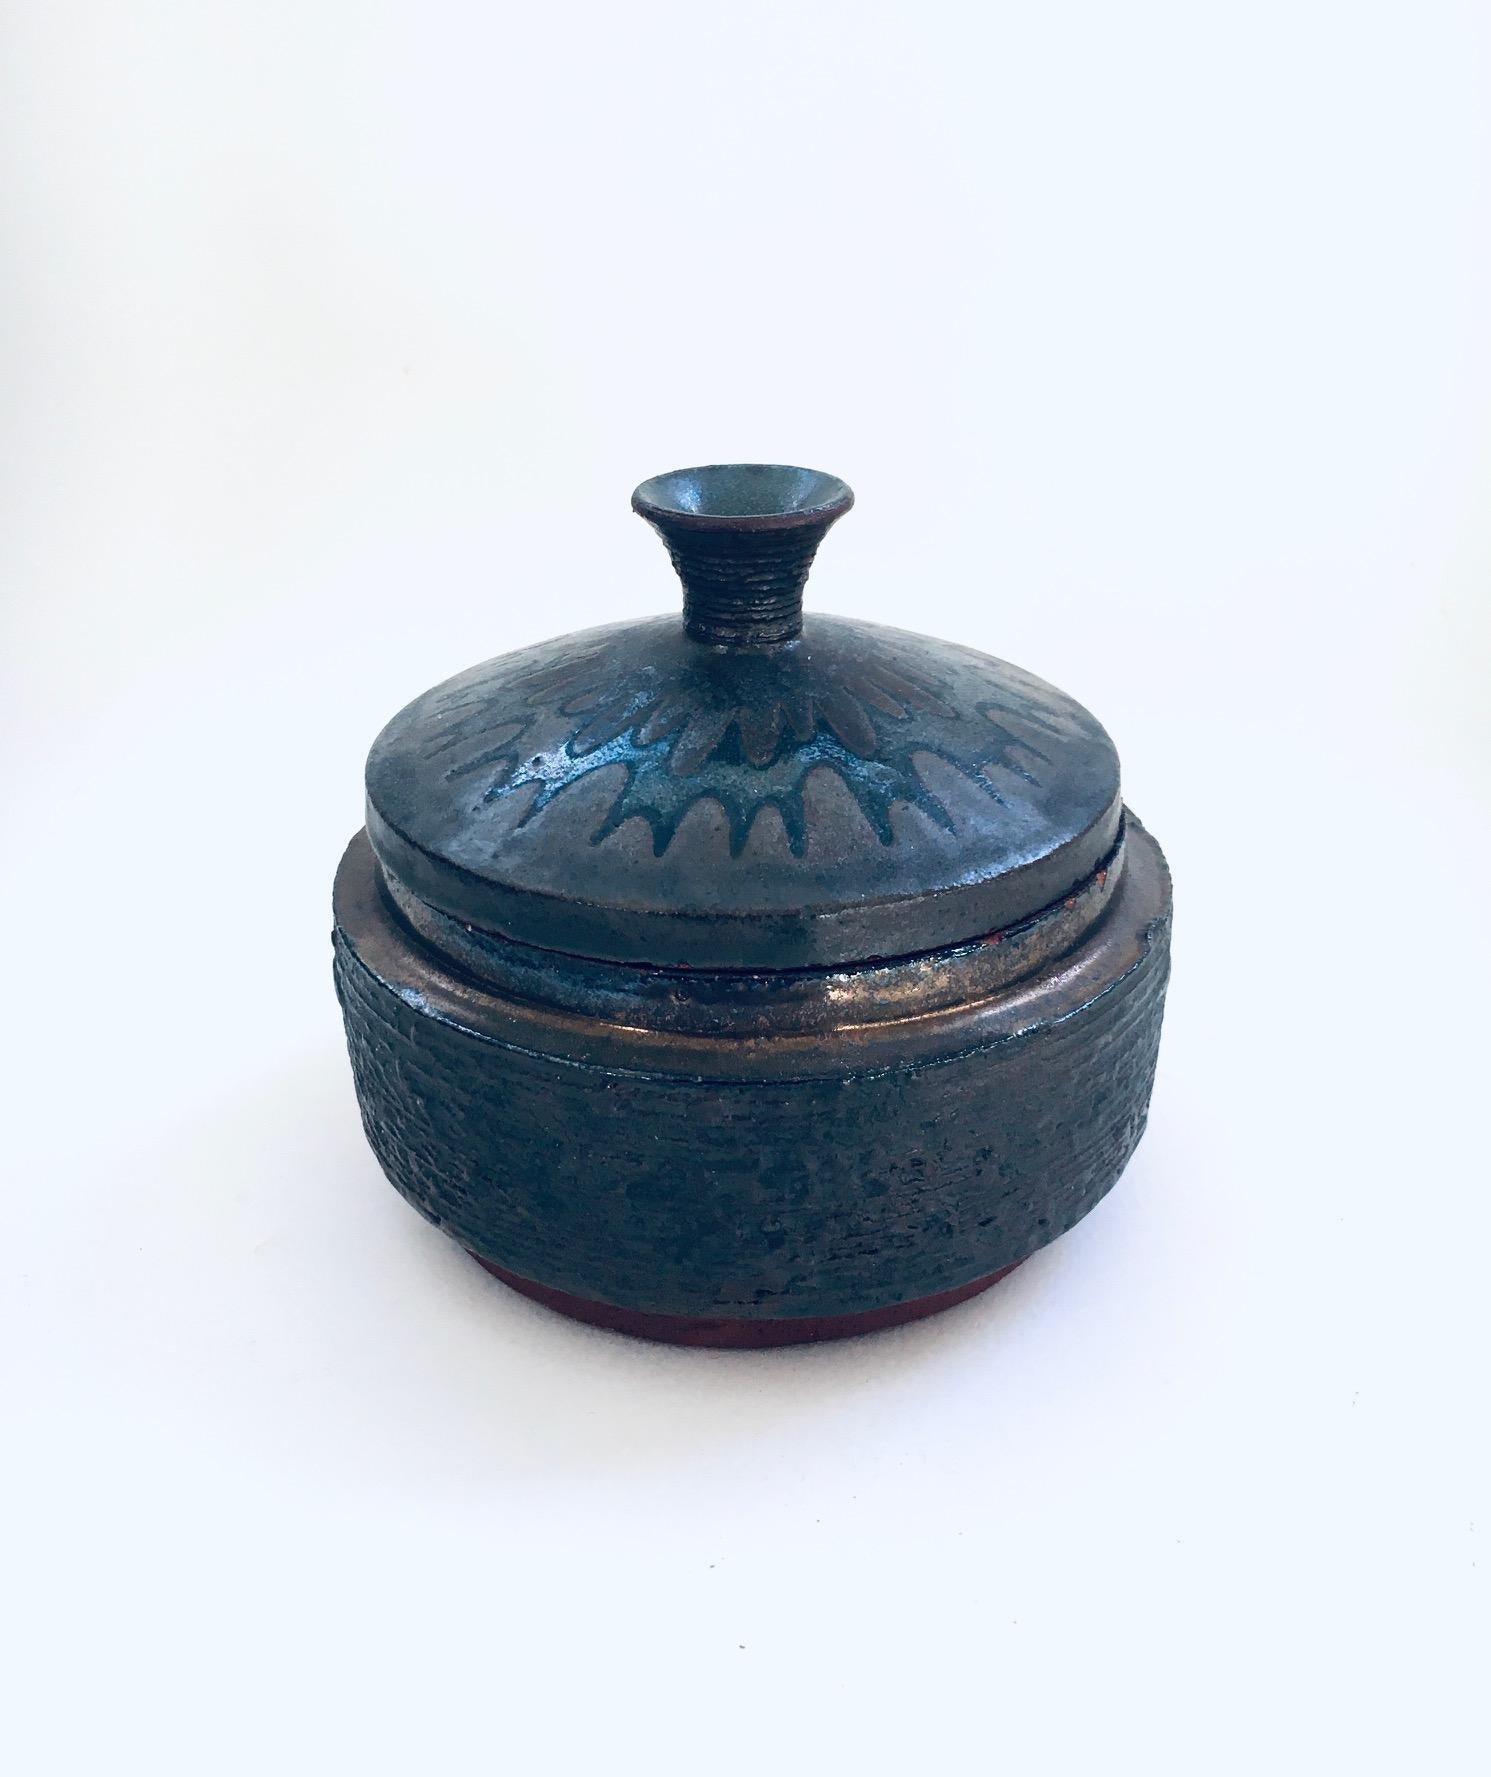 Vintage Midcentury Art Pottery Studio Lidded Bowl by Amphora, Perignem Studio, Belgium 1960's. Probably by Rogier Vandeweghe. Stamped on the bottom. Nice dark glazed outside with typical relief on the bowl and figurative on the lid, cream glaze on